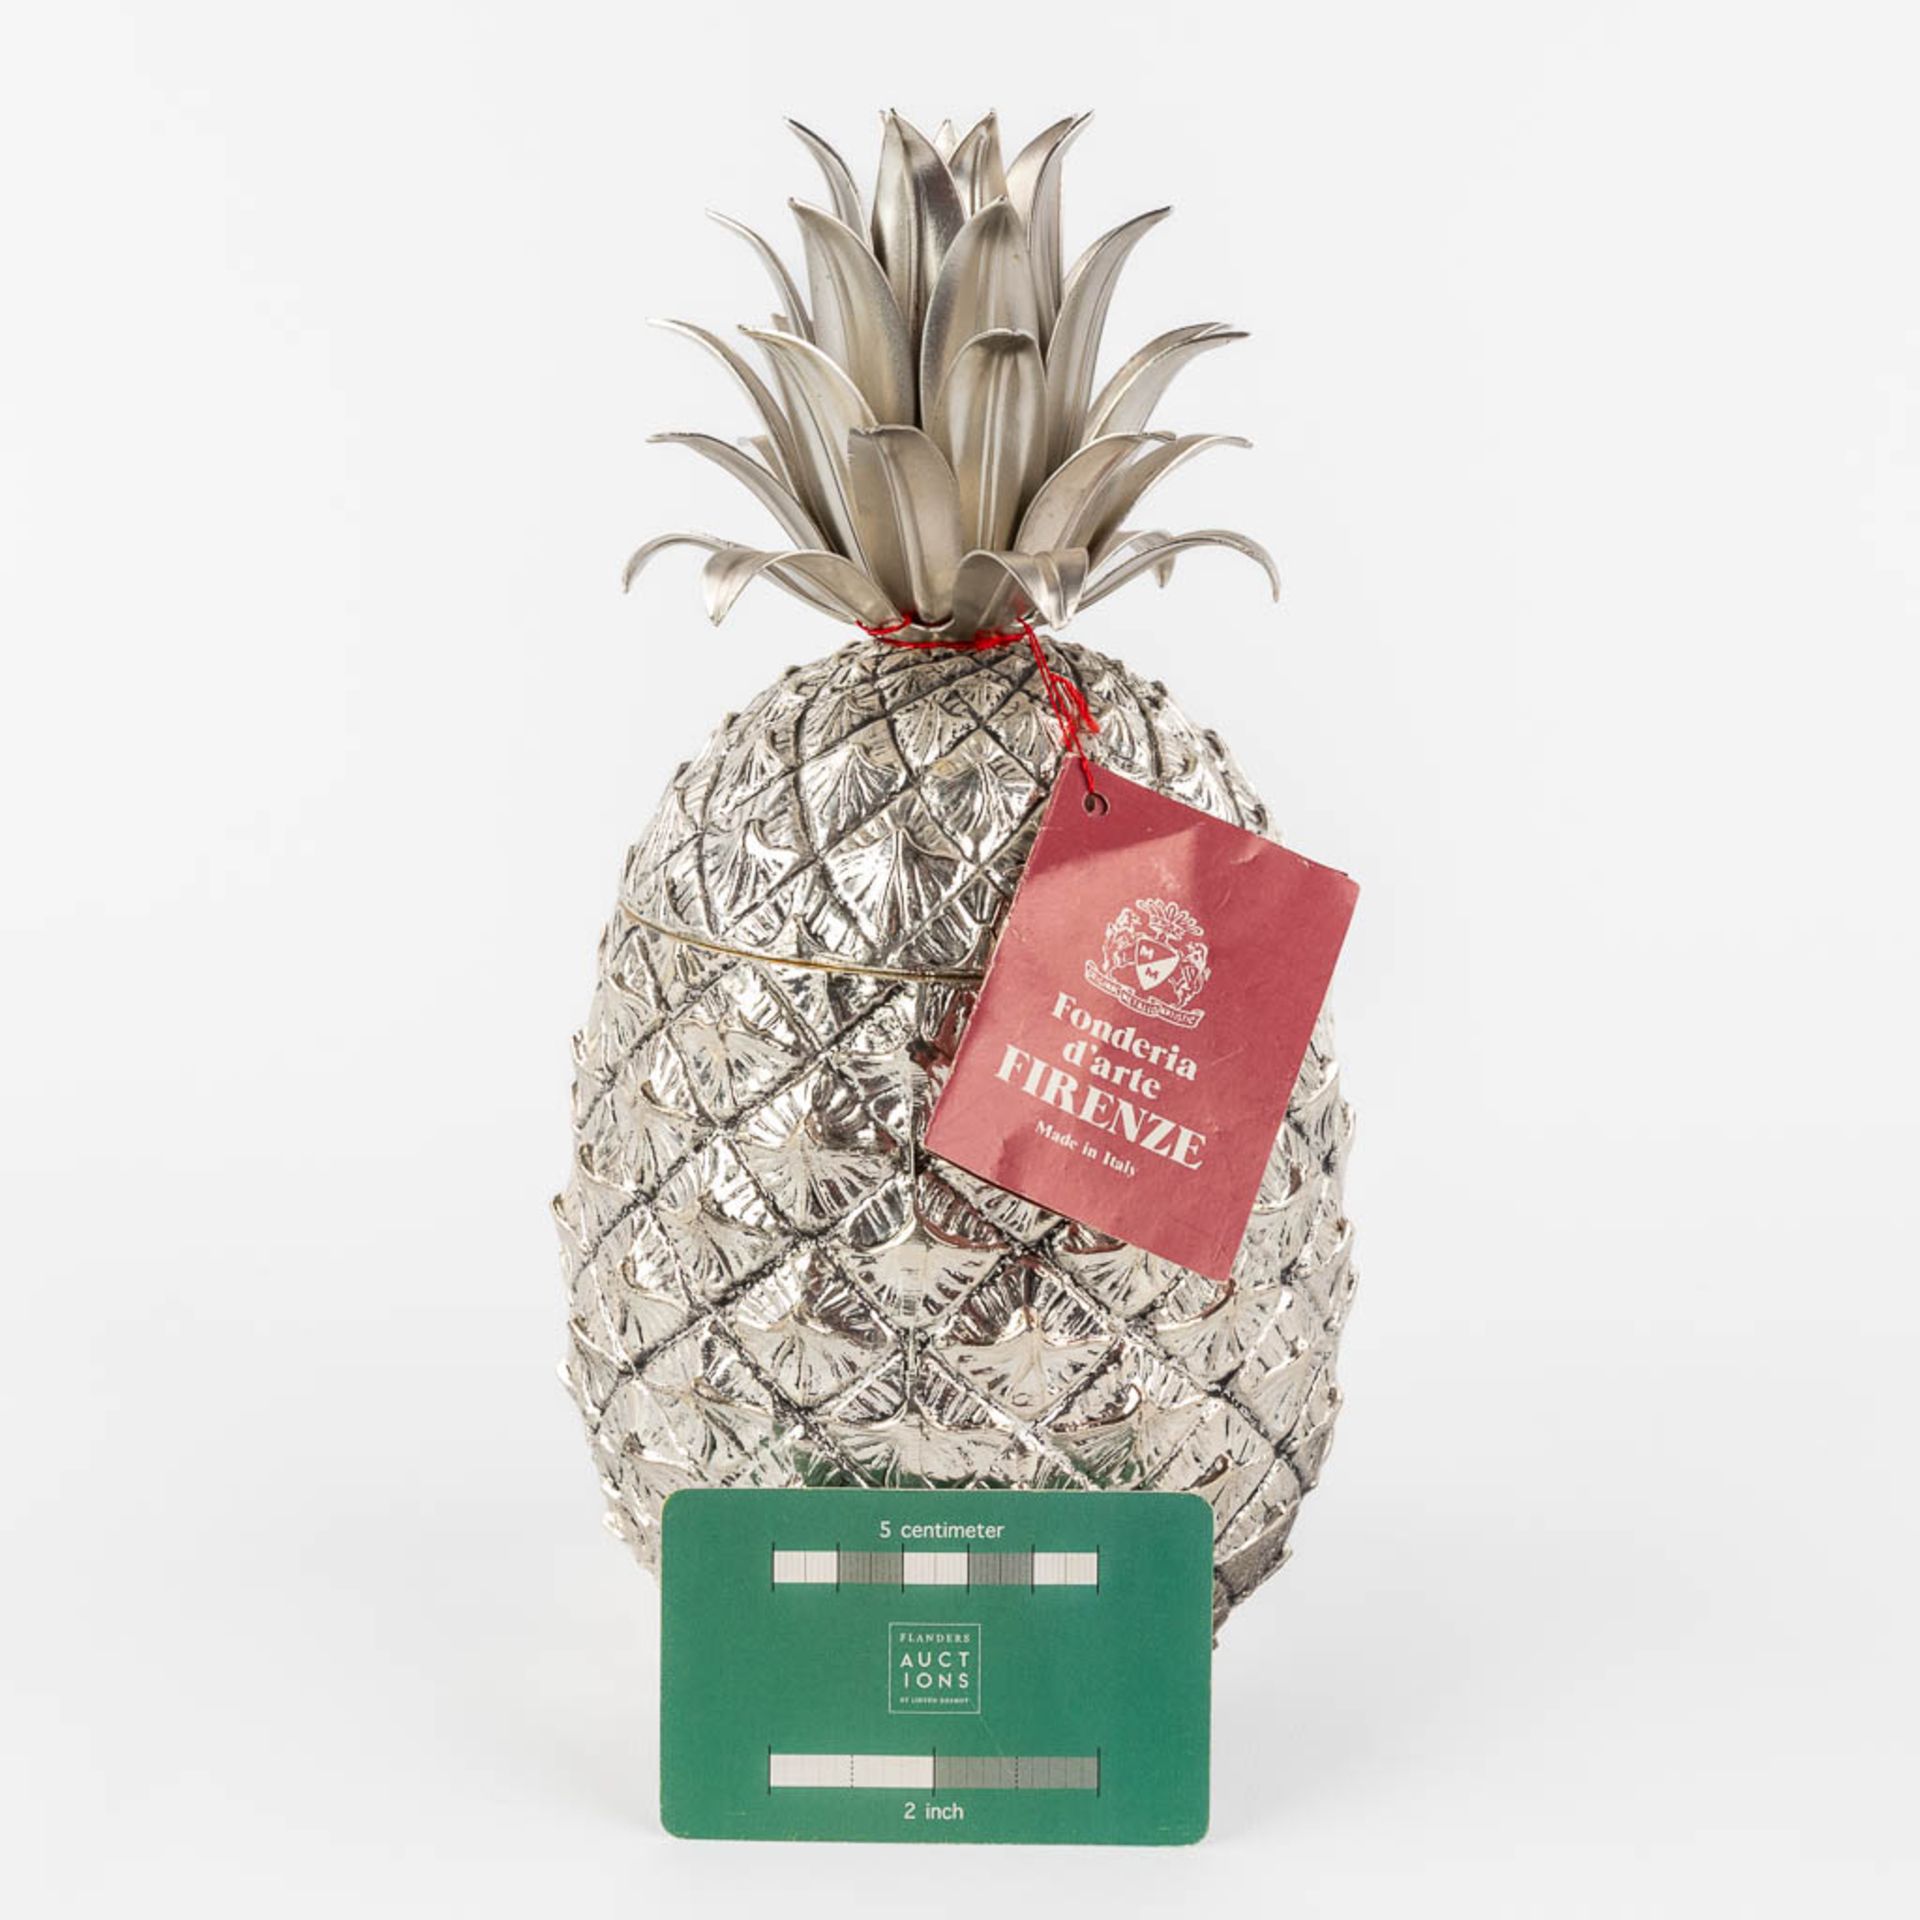 Mauro MANETTI (XX) 'Pineapple' an ice pail. Italy, 20th C. (H:26 x D:14 cm) - Image 2 of 10